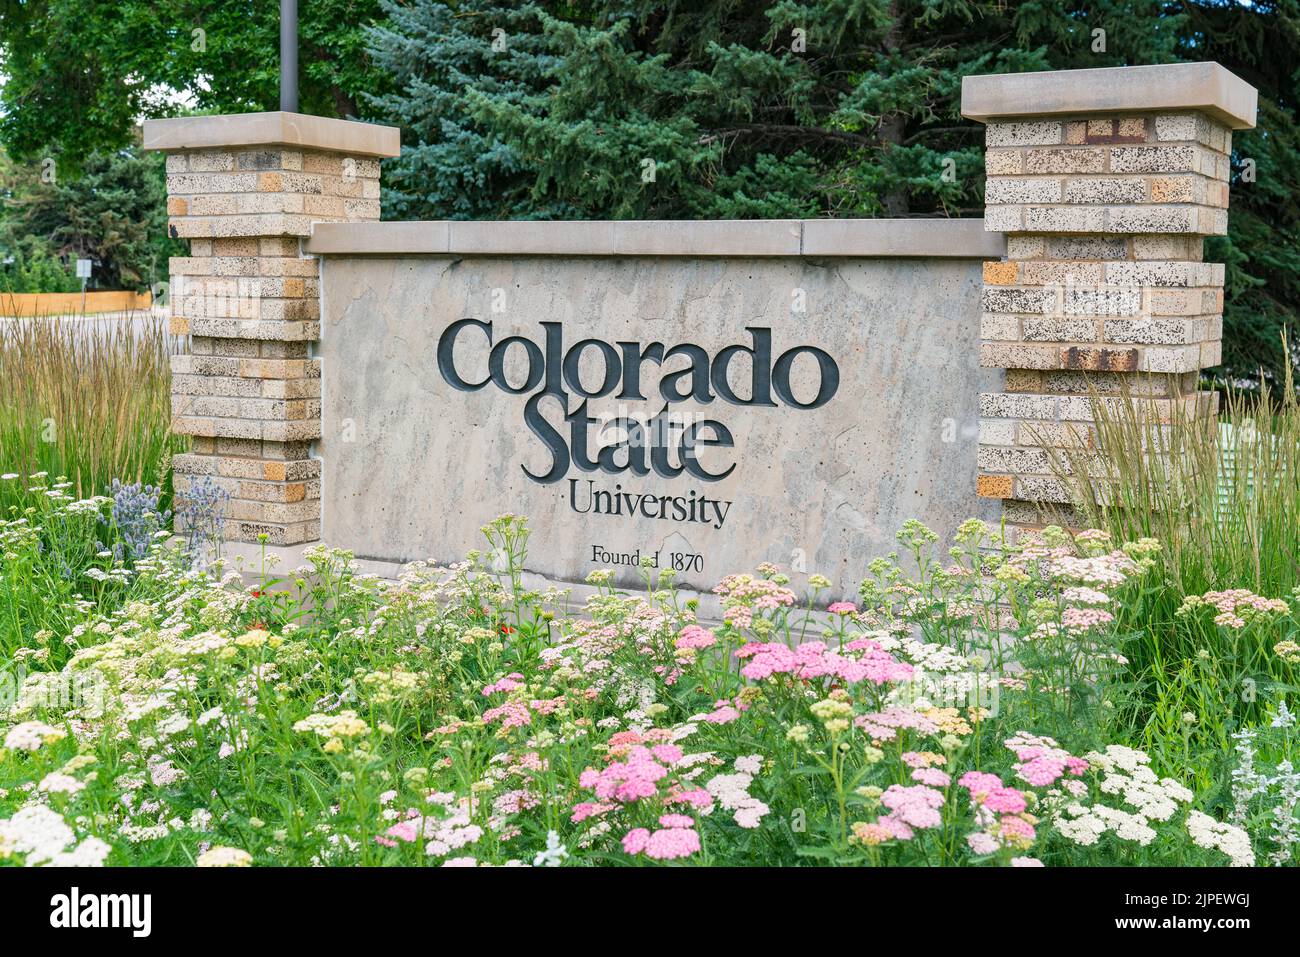 Fort Collins, CO - July 16, 2022: Entrance sign to the University of Colorado in Fort Collins, Colorado Stock Photo